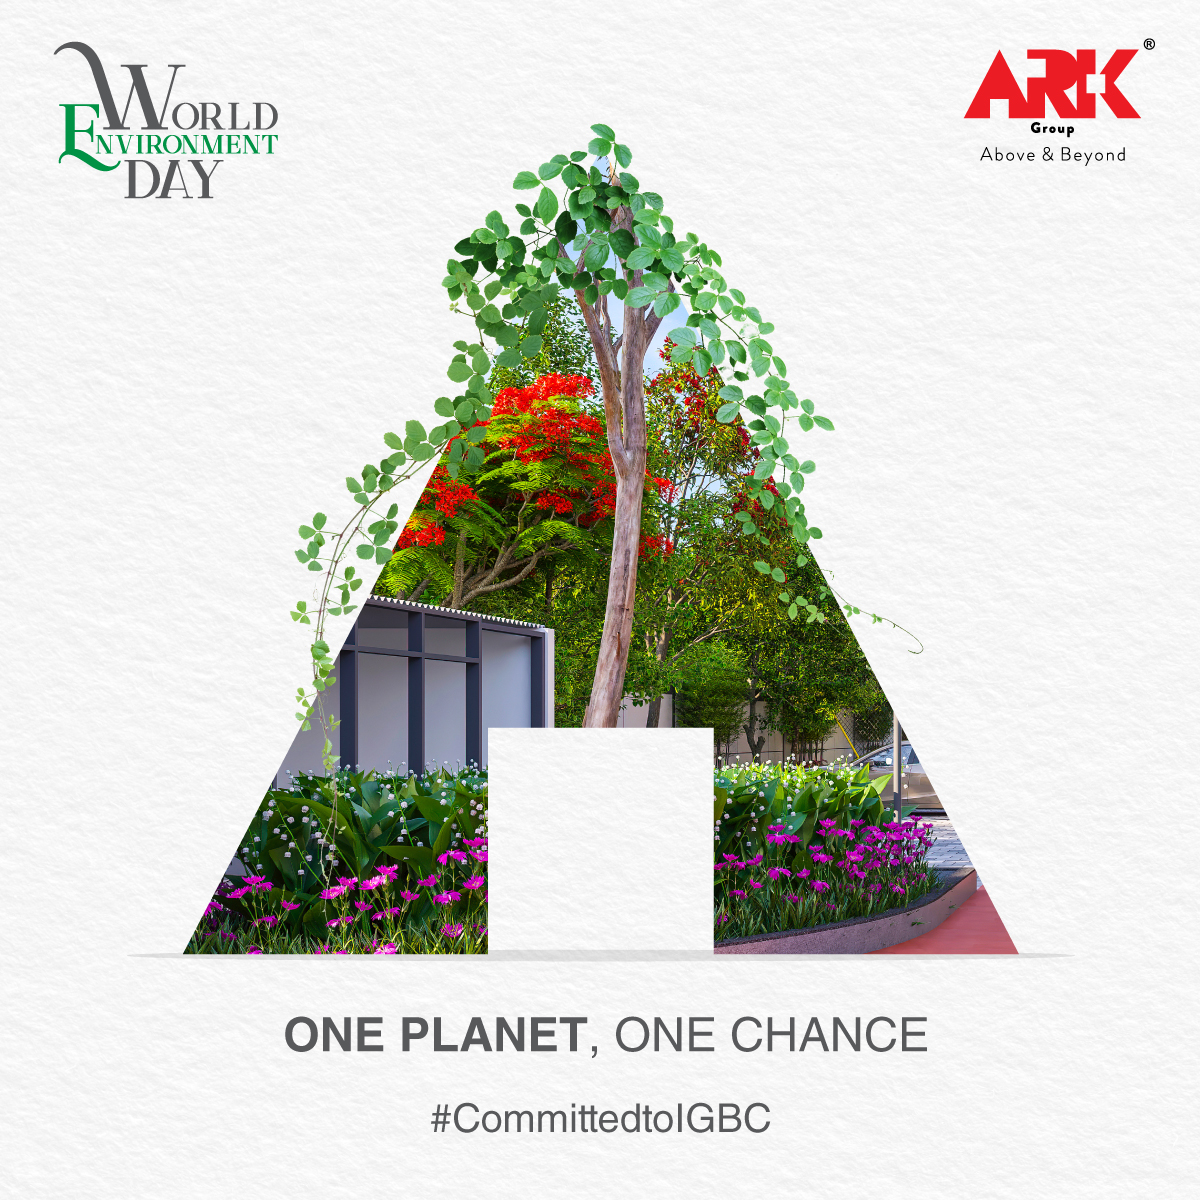 Our planet, is our responsibility. 🌎 This World Environment Day, let's work together to create a sustainable future for all. 🌳 #OnePlanetOneChance

#igbc #igbc_explore #greenarchitecture #greenbuilding #sustainable #sustainability #architecture